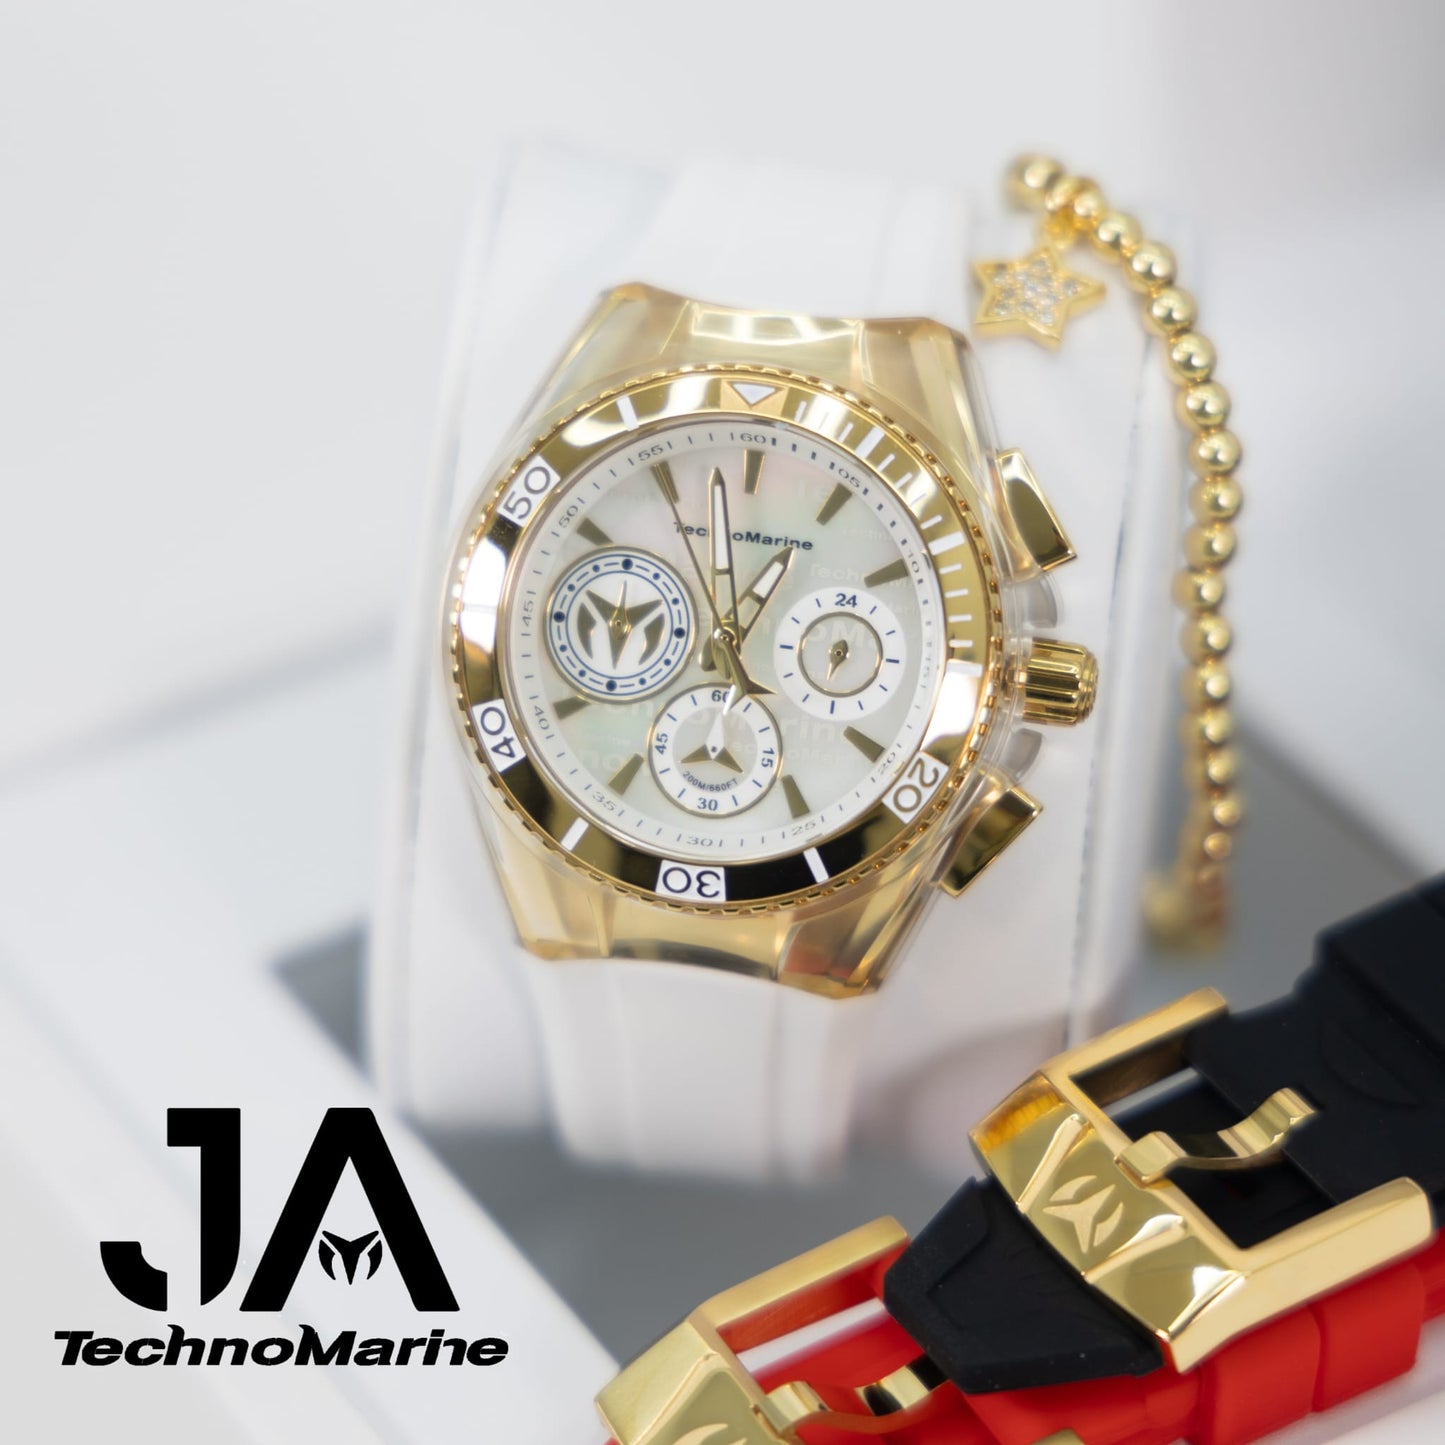 TechnoMarine Cruise California Women's Watch w/ Metal, Mother of Pearl & Oyster Dial - 40.57mm, White Tres Correas